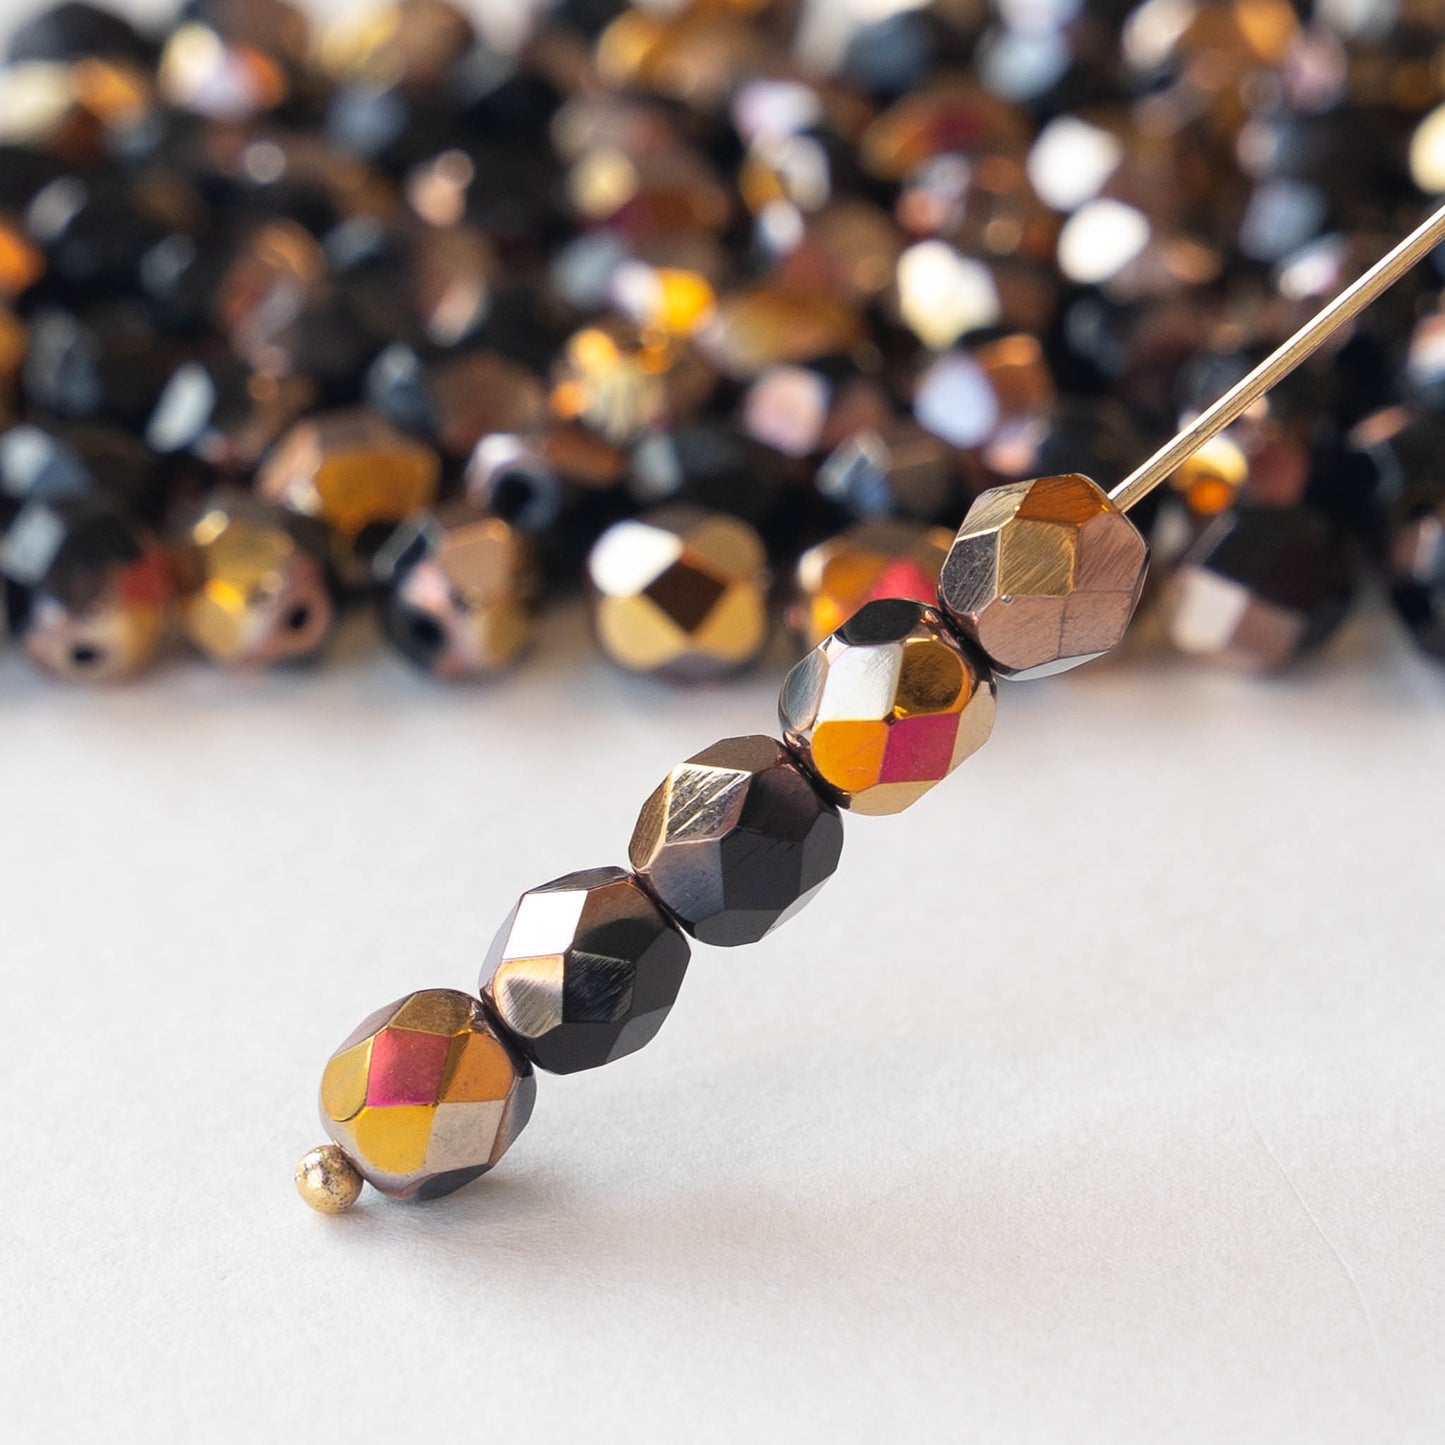 6mm Faceted Round Beads - Opaque Black with Metallic Tones - 50 beads